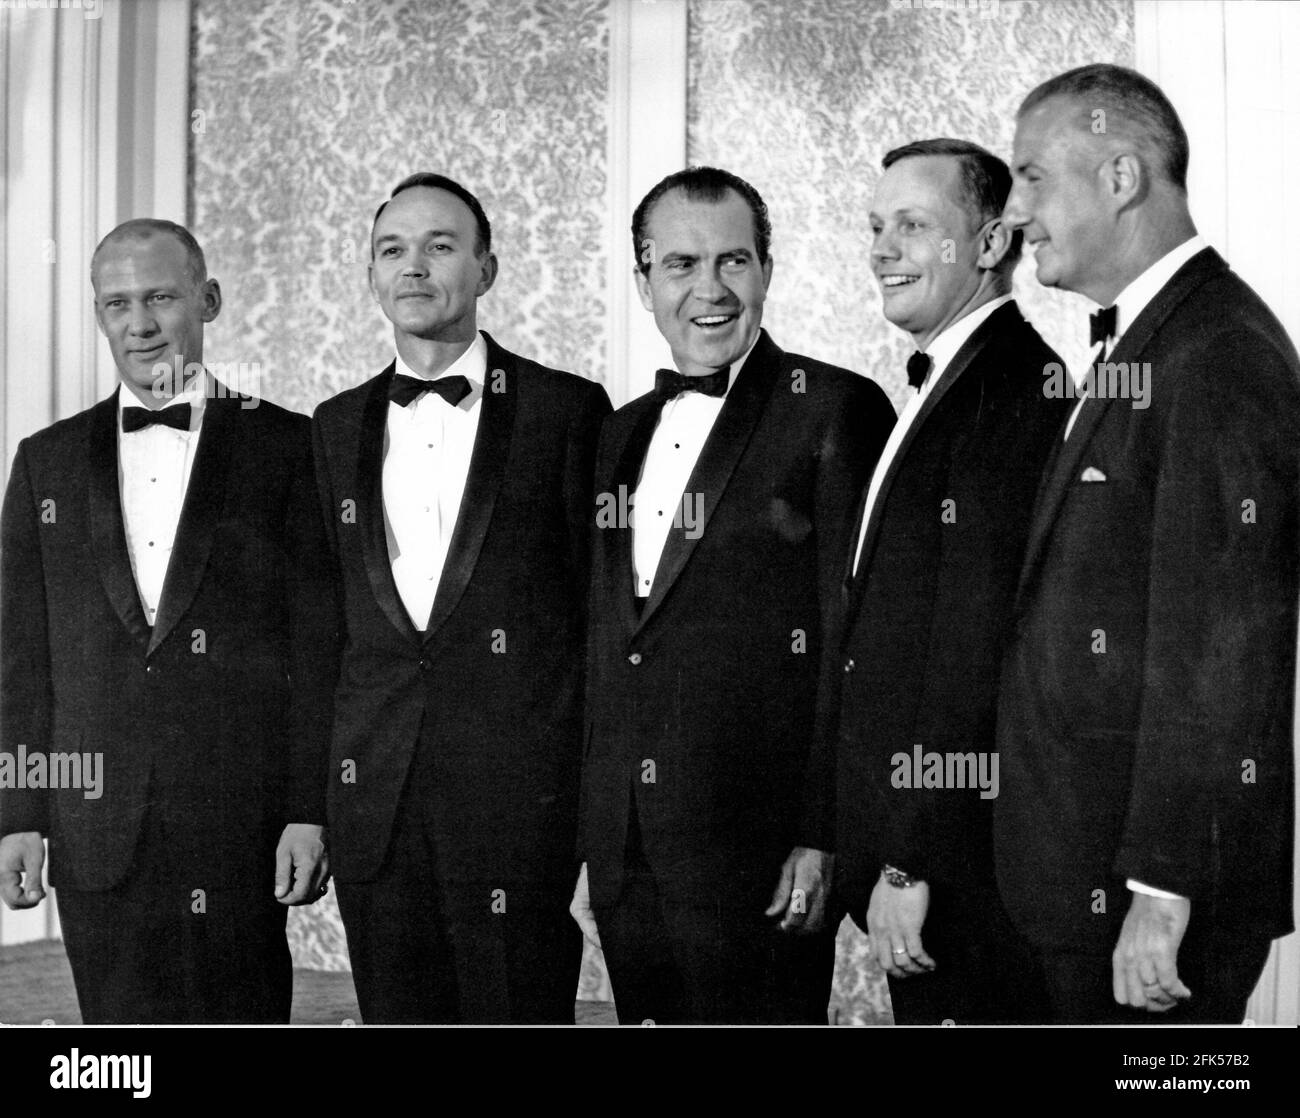 File photo - Los Angeles, CA - -- The Apollo 11 Astronauts pose for a photo with United States President Richard M. Nixon and Vice President Spiro T. Agnew prior to the lavish state dinner in the Astronauts' honor at the Century Plaza Hotel in Los Angeles, California on August 14, 1969. From left to right: Edwin E. 'Buzz' Aldrin, Jr., Michael Collins, President Nixon, Neil A. Armstrong, and Vice President Agnew.. --- American astronaut Michael Collins, who flew the Apollo 11 command module while his crewmates became the first people to land on the Moon on July 20, 1969, died on Wednesday after Stock Photo